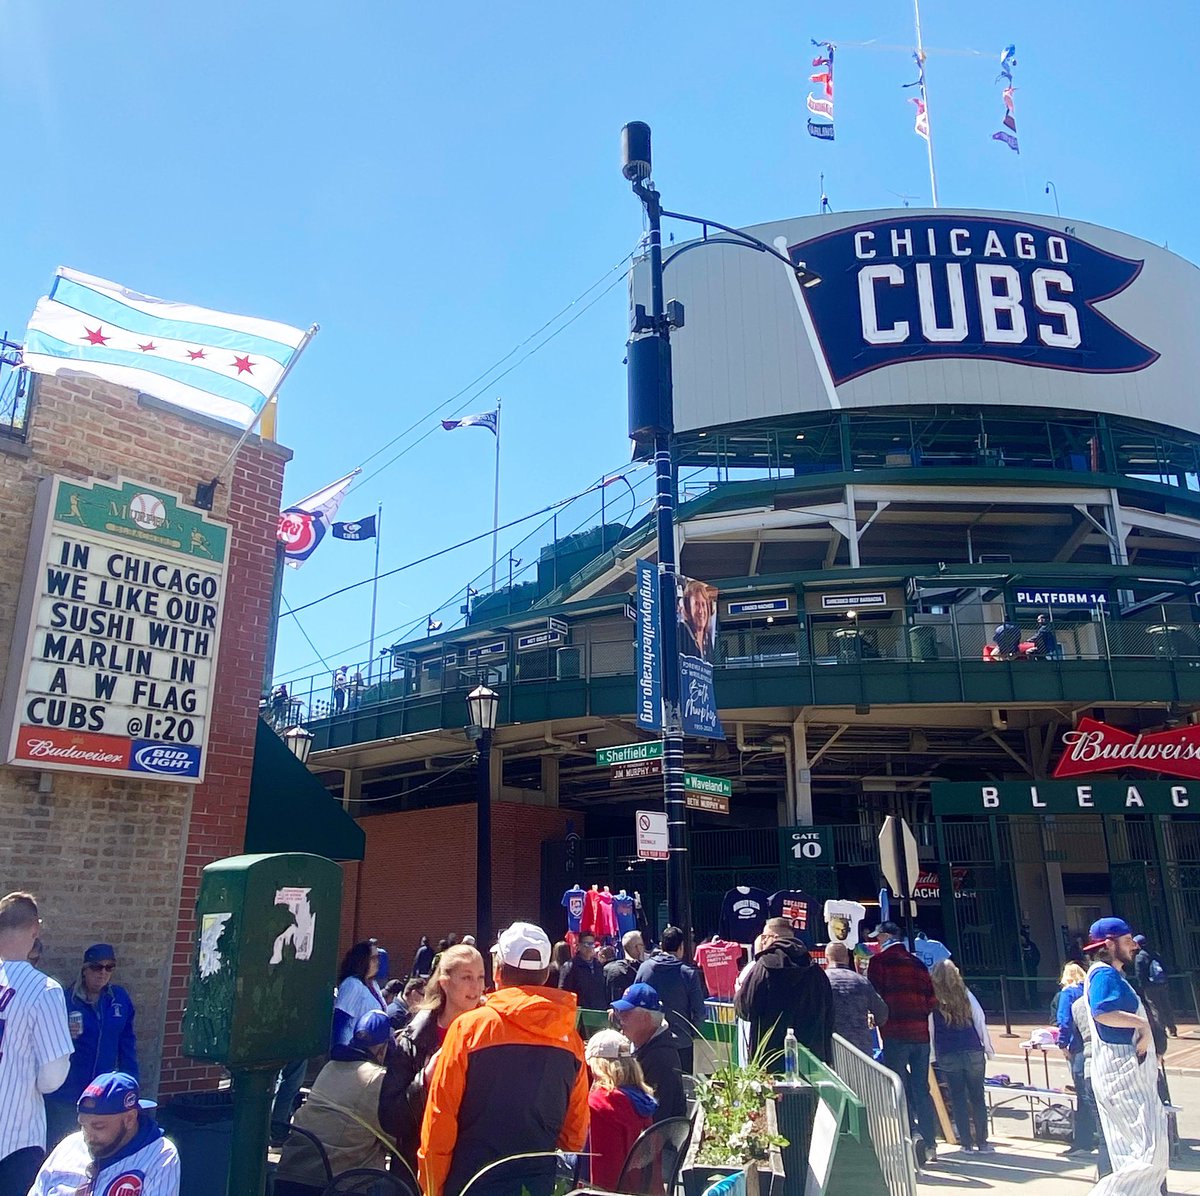 Cubs on a seafood diet this weekend. One Miami roll, coming right up! 

Marlins v Cubs at 1:20 on this glorious Friday. 

#chicagocubs #chicagocubsbaseball #chicagocubsfan #chicagocubs🐻 #gocubsgo #gocubs #gocubsgo⚾️🐻💙❤️ #cubs #cubsbaseball #cubsnation #murphysbleachers